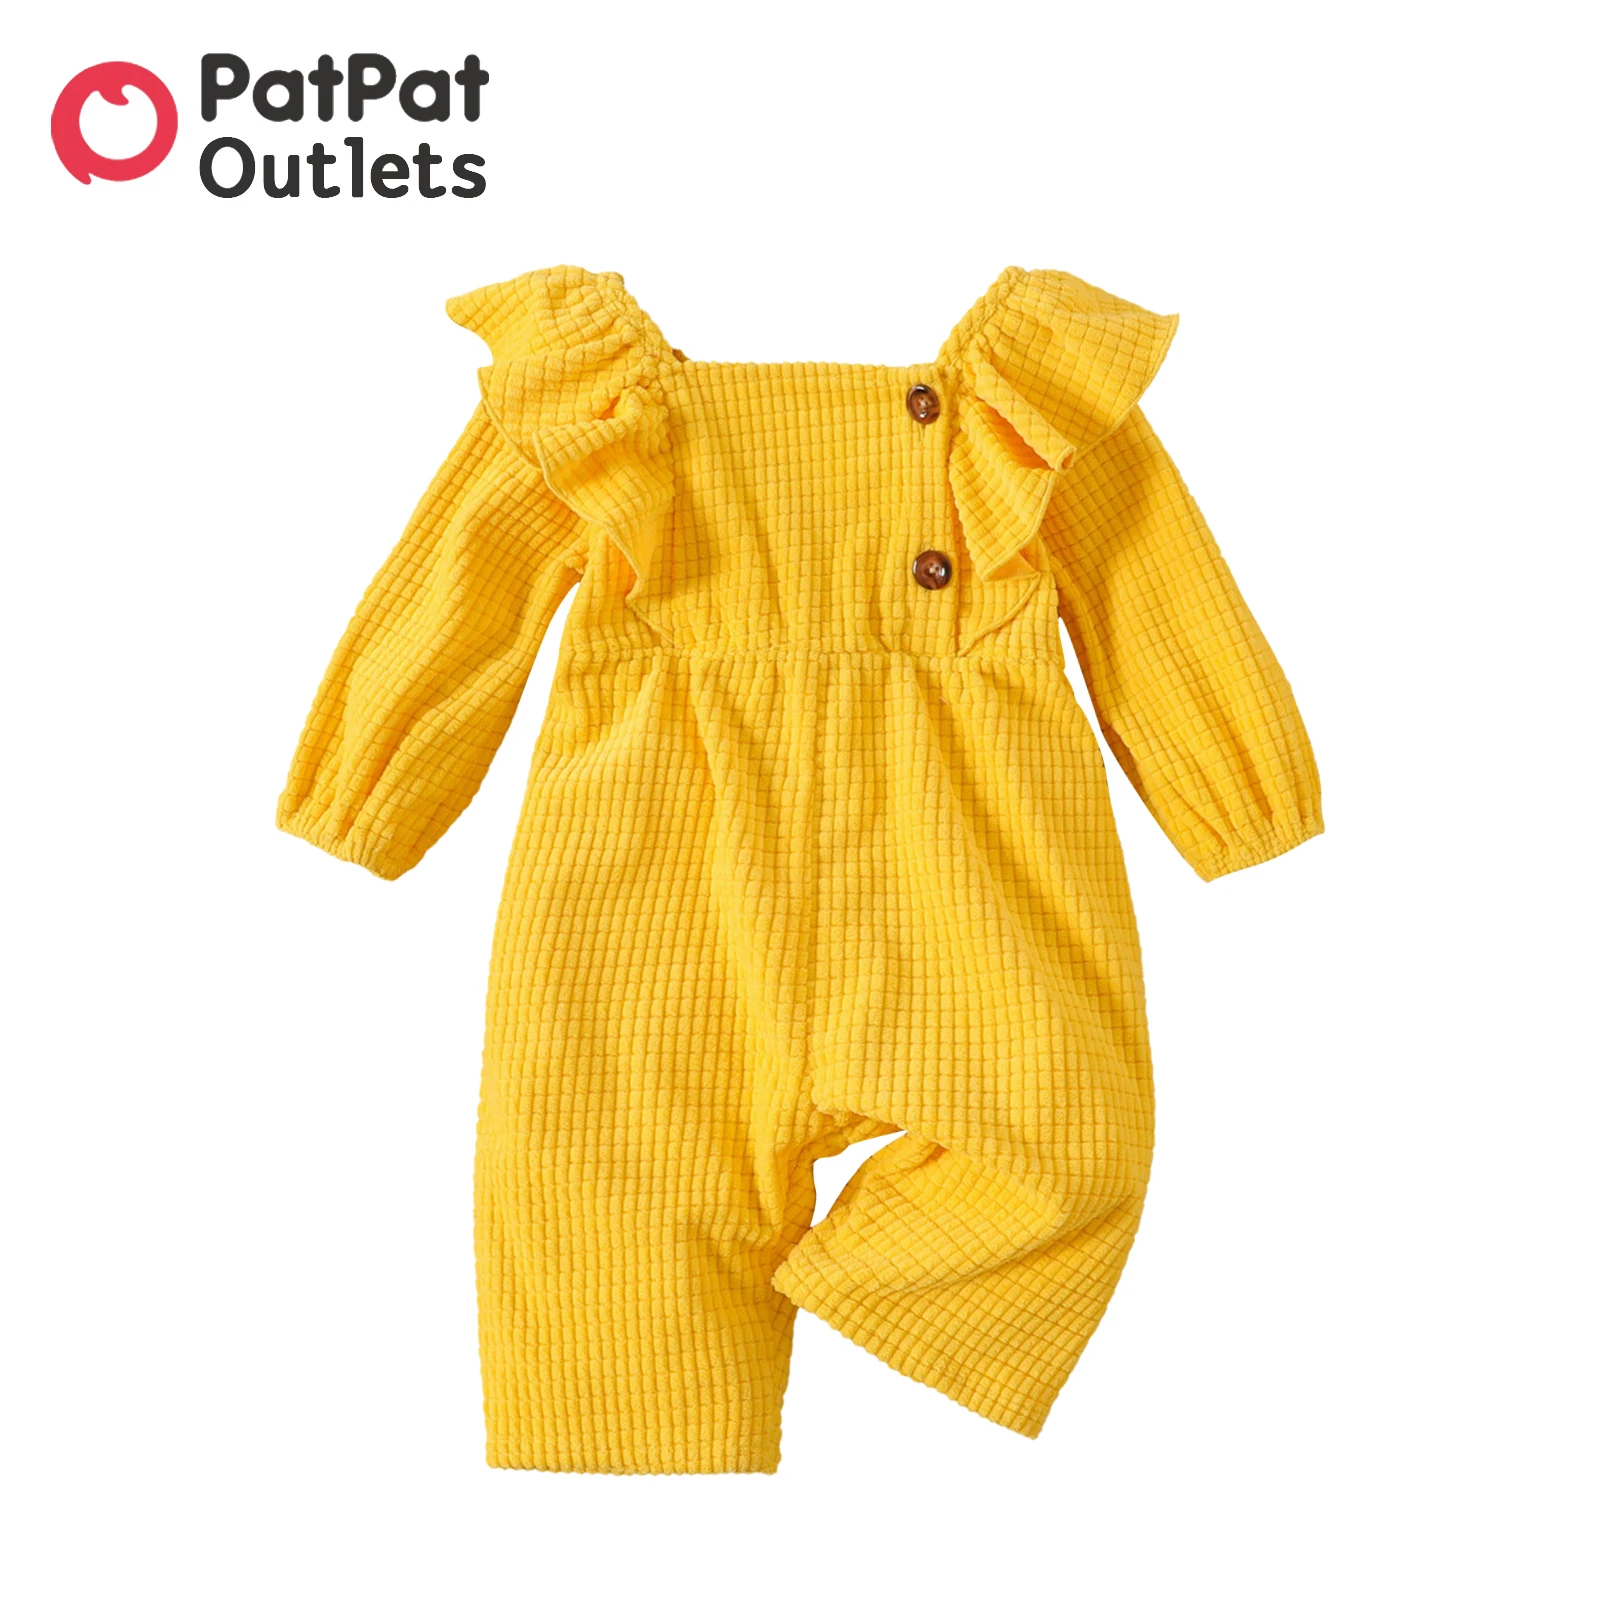 

PatPat Newborn Baby Girl Clothes New Born Romper Babies Costume Birth Jumpsuits Long-sleeve Yellow Textured Ruffle Outfit